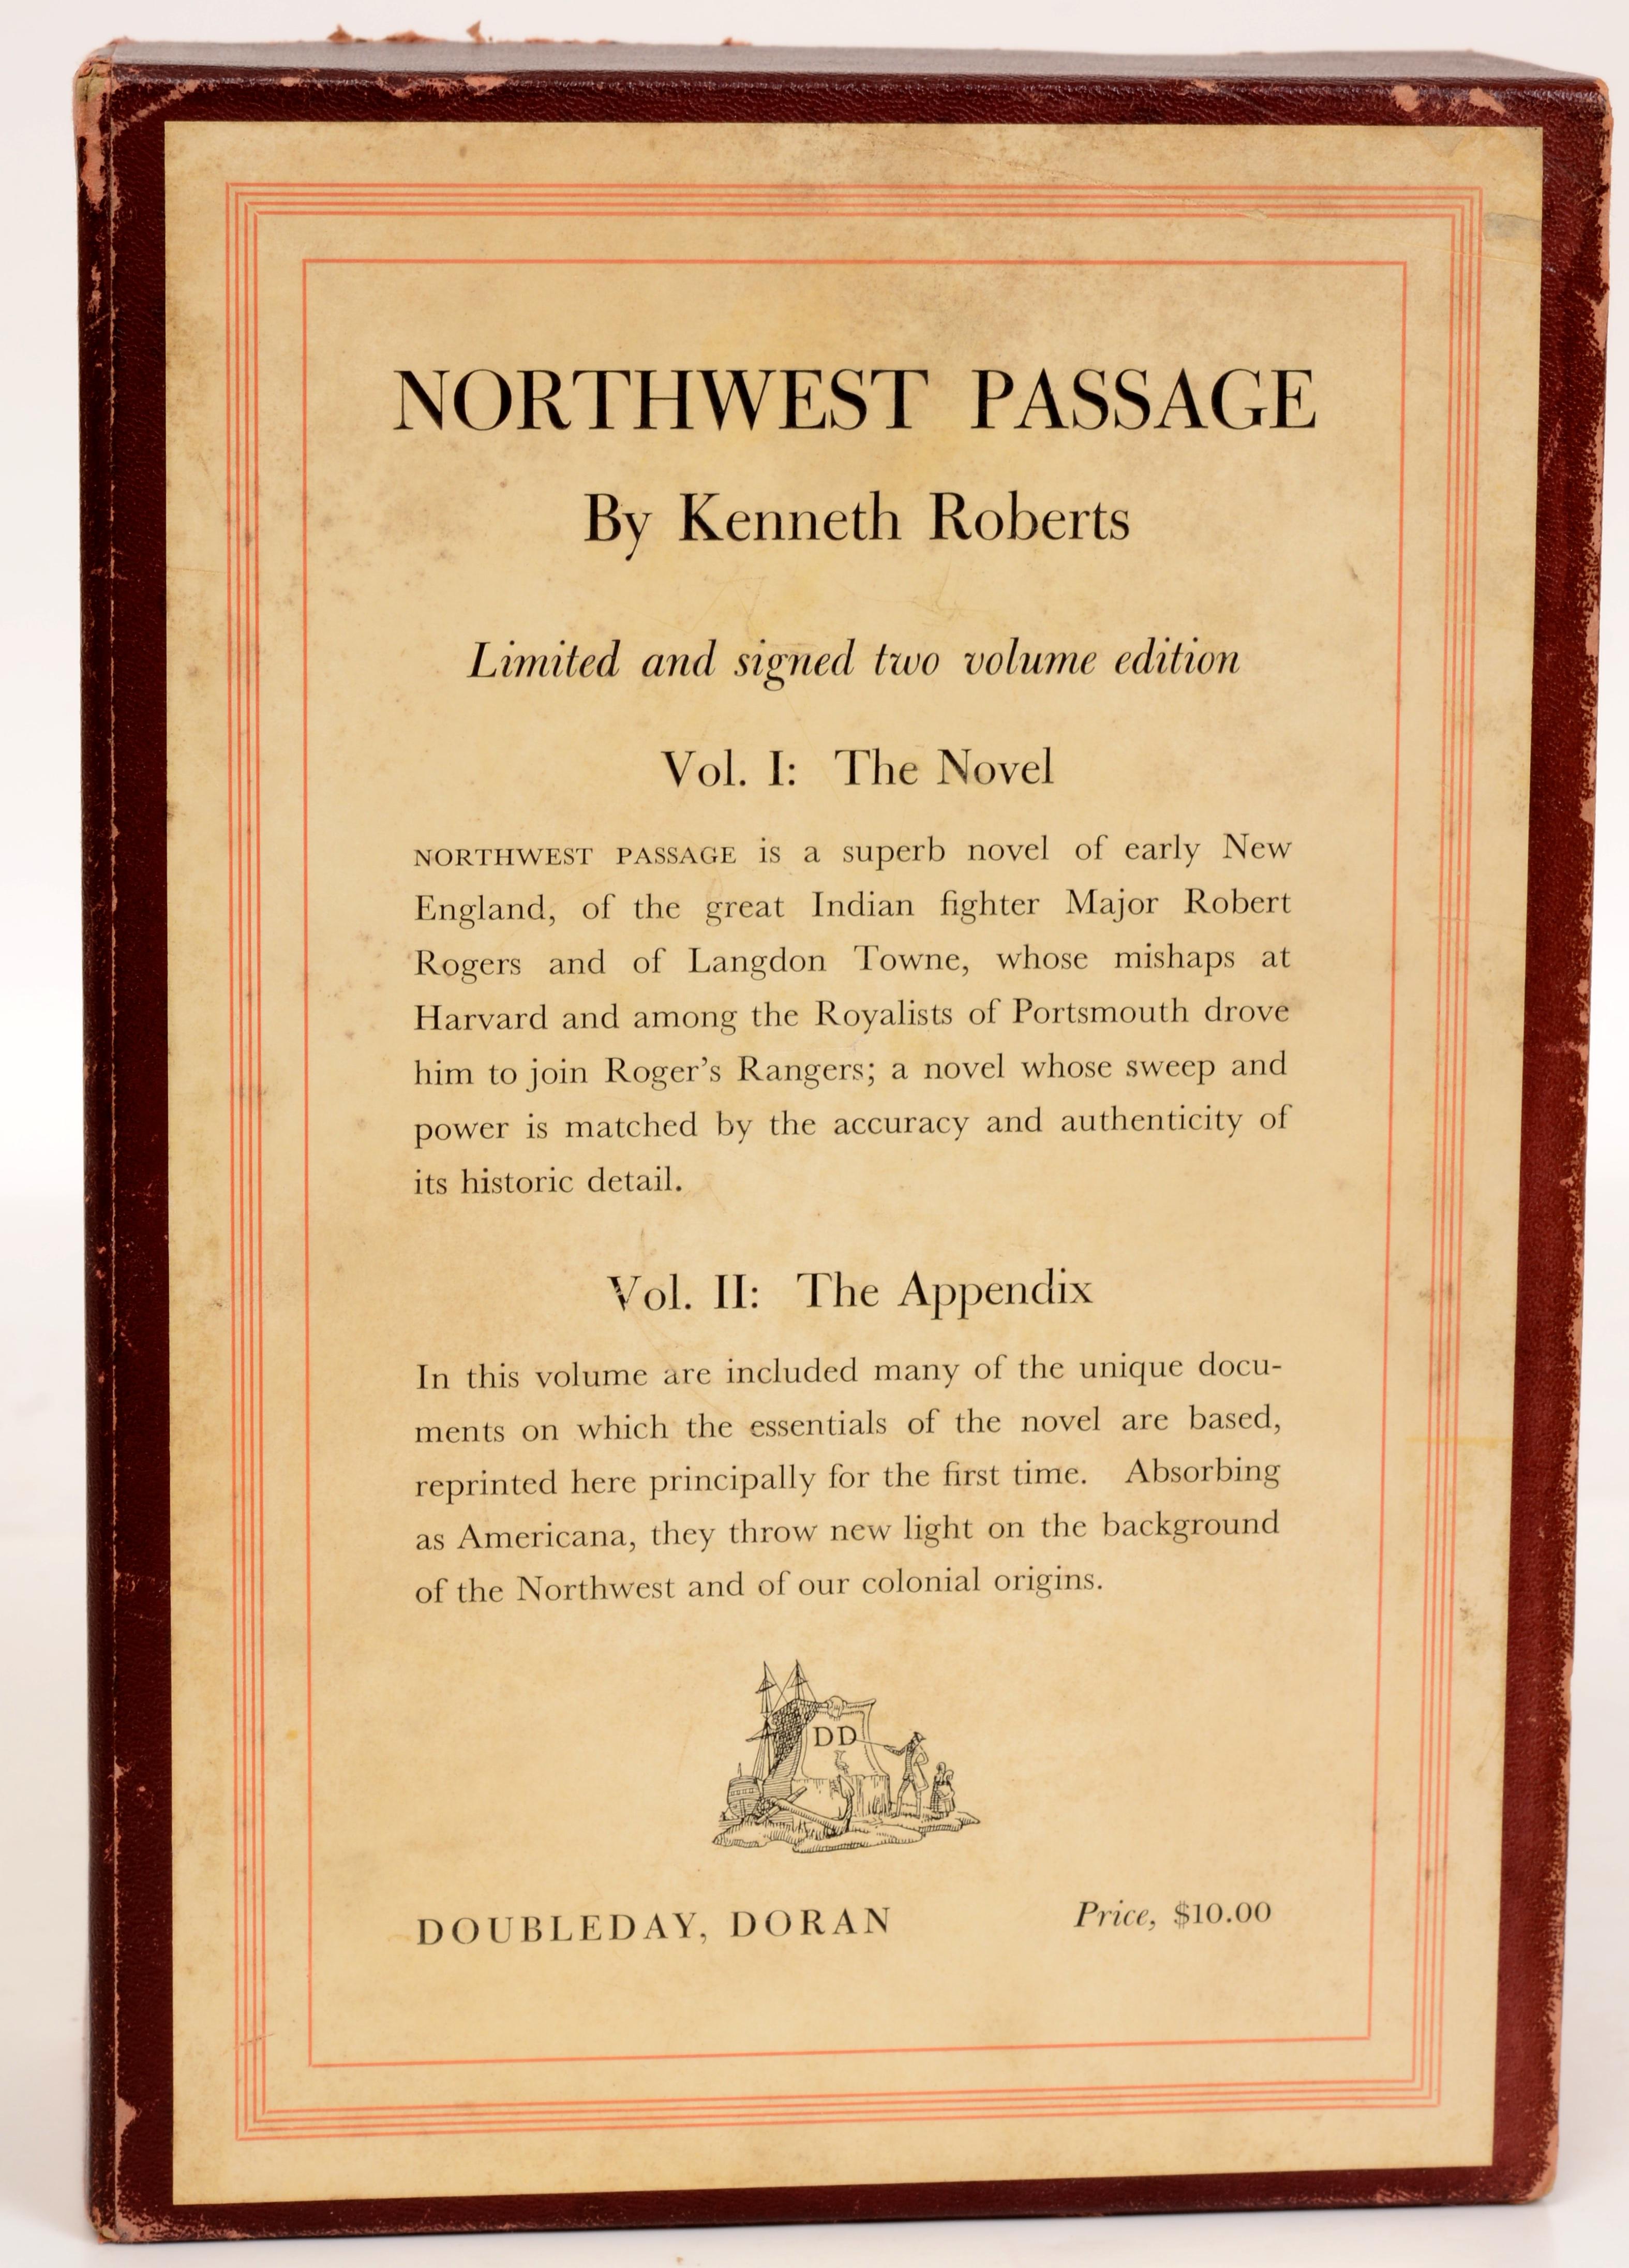 Northwest Passage 1st Limited 2 Vol Ed by Kenneth Roberts, Signed & Numbered  For Sale 2